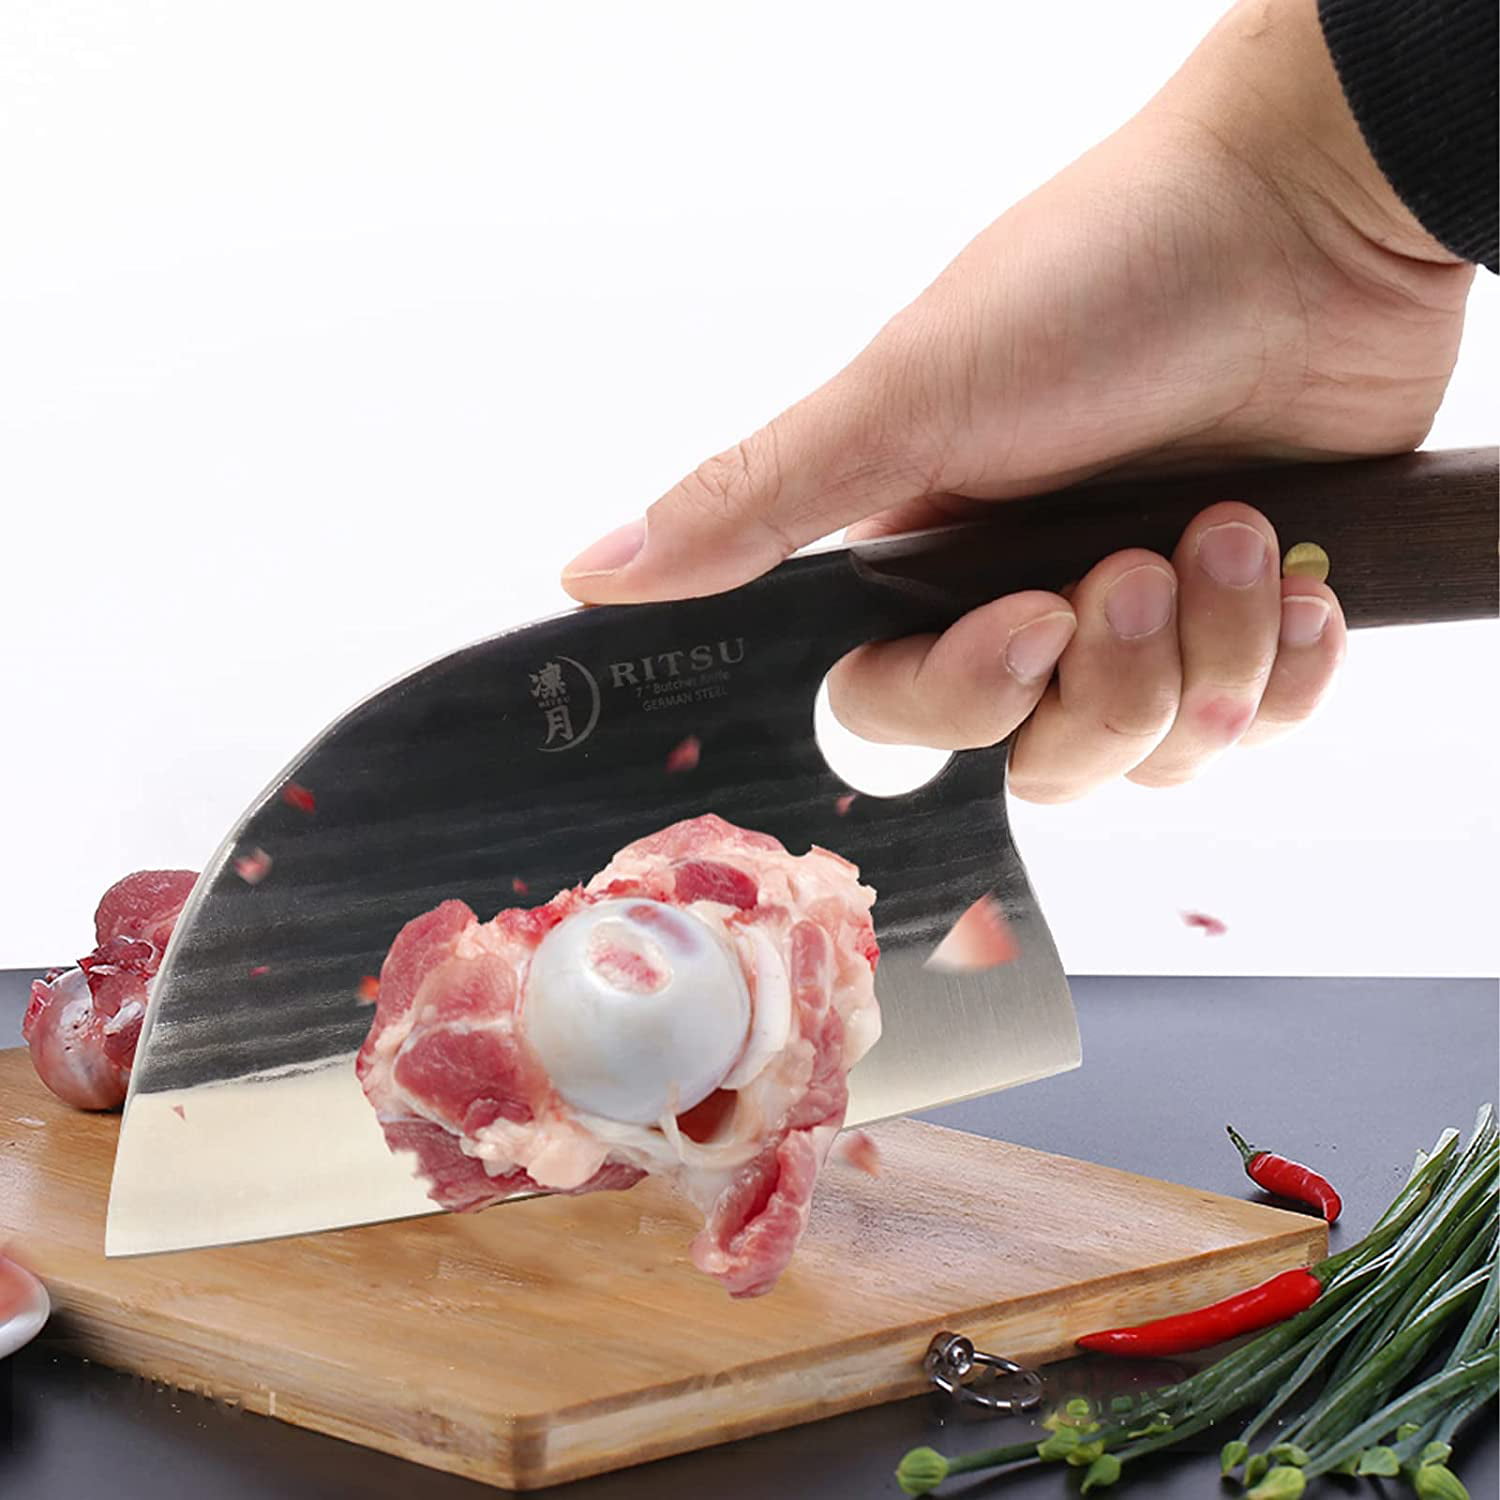  ENOKING Cleaver Knife, Meat Cleaver Hand Forged Serbian Chef  Knife German High Carbon Stainless Steel Vegetable Cleaver: Home & Kitchen